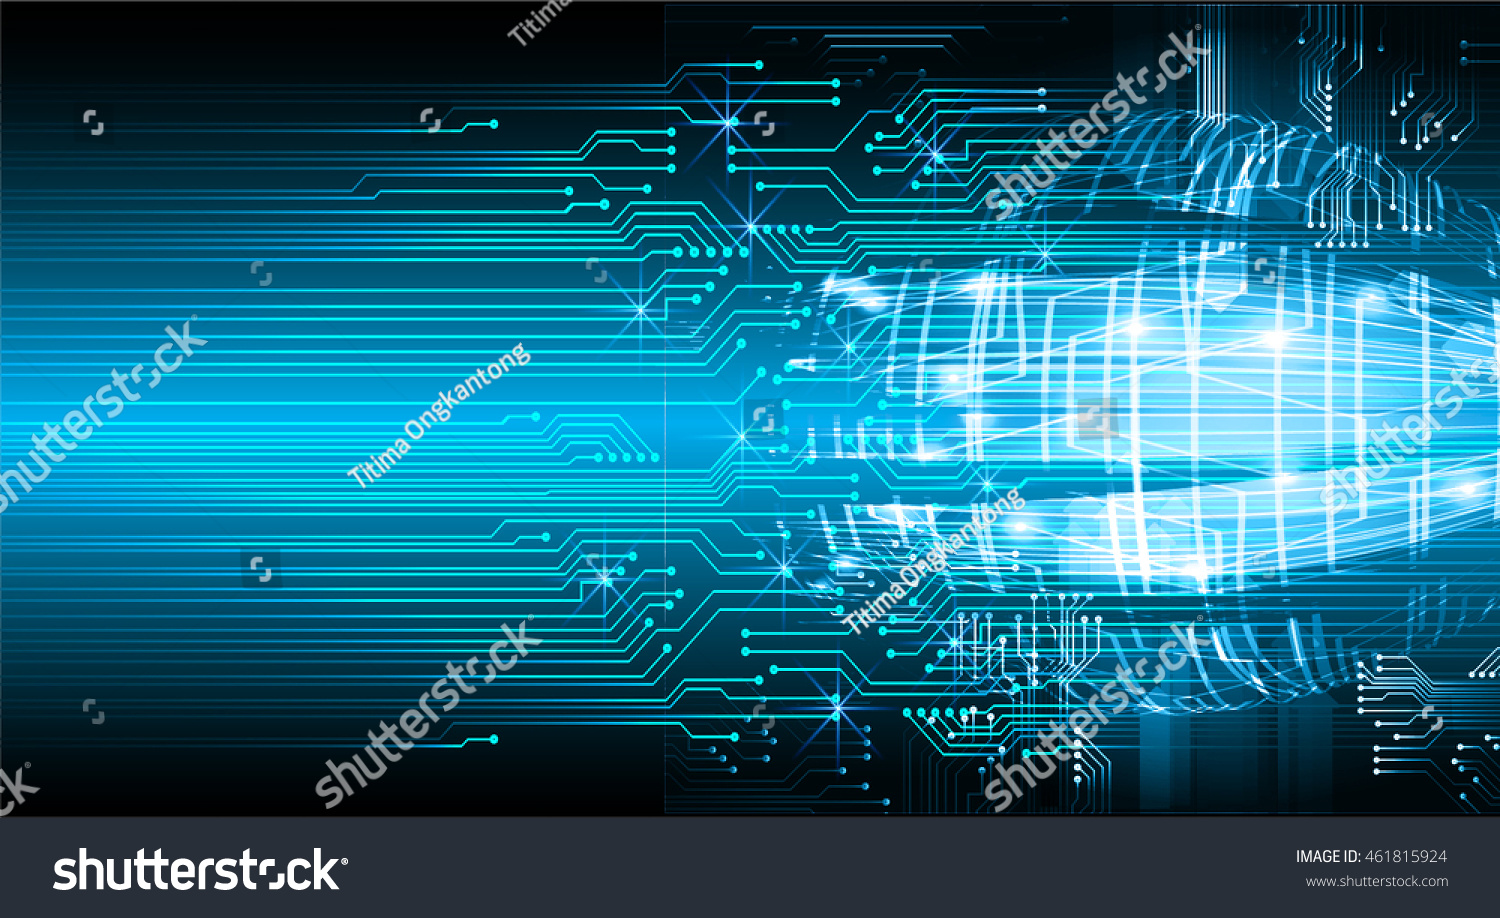 Blue Abstract Cyber